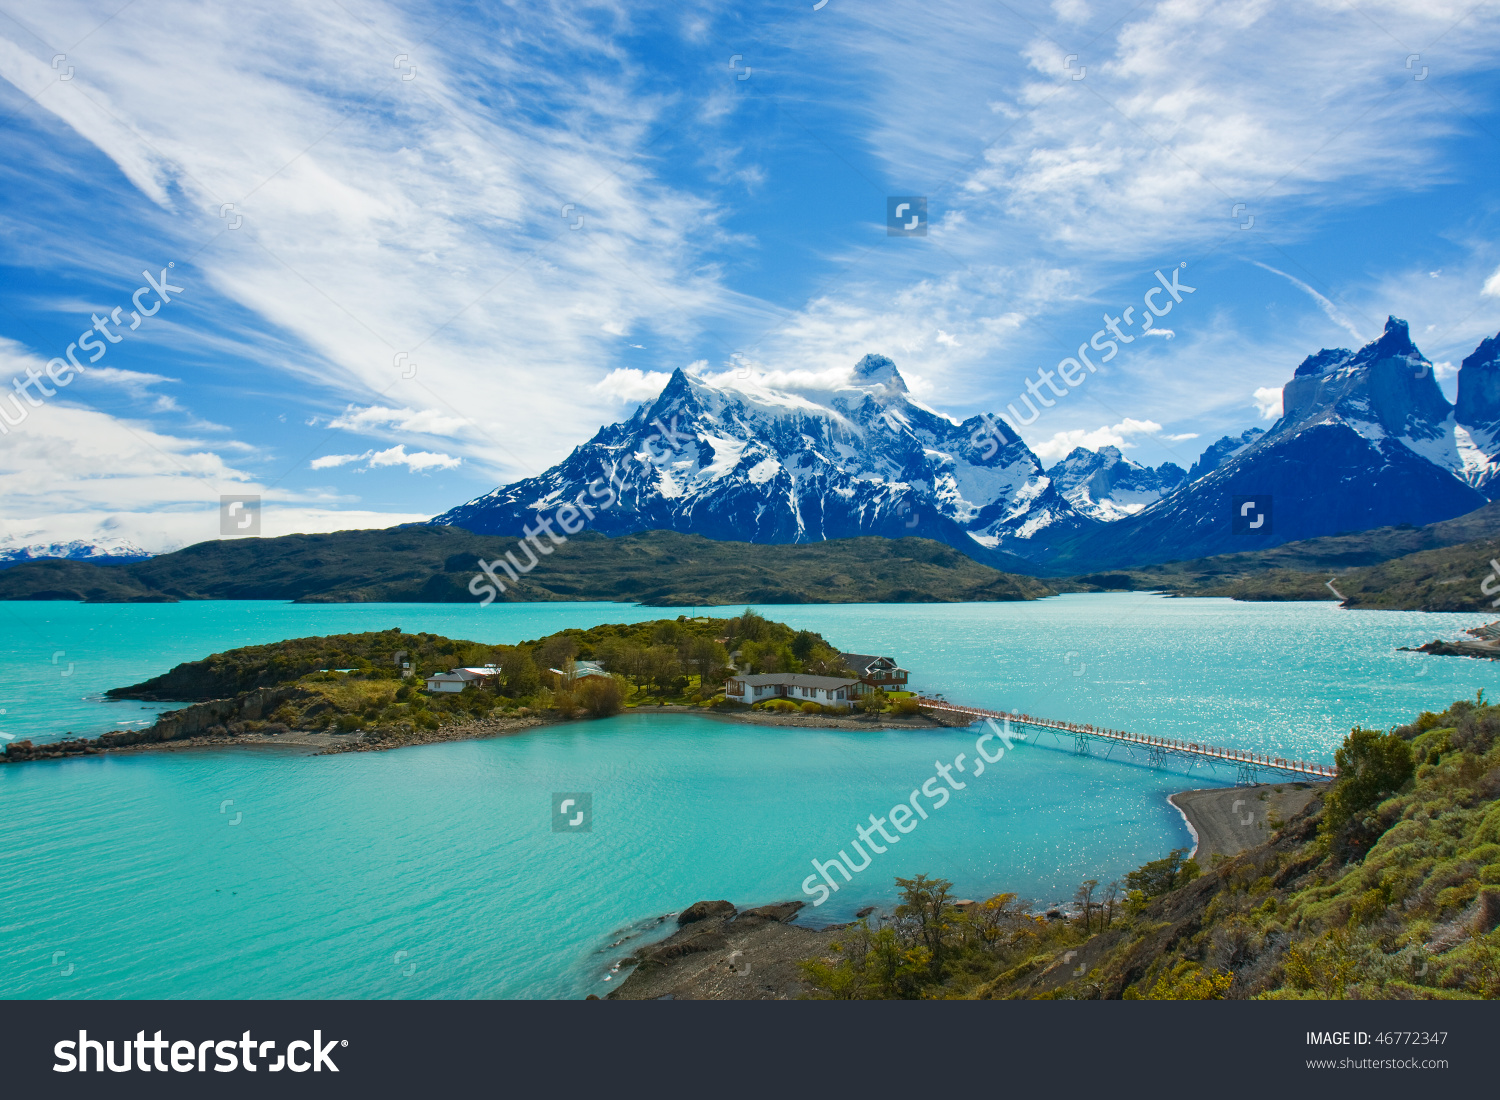 Torres Del Paine National Park clipart #3, Download drawings